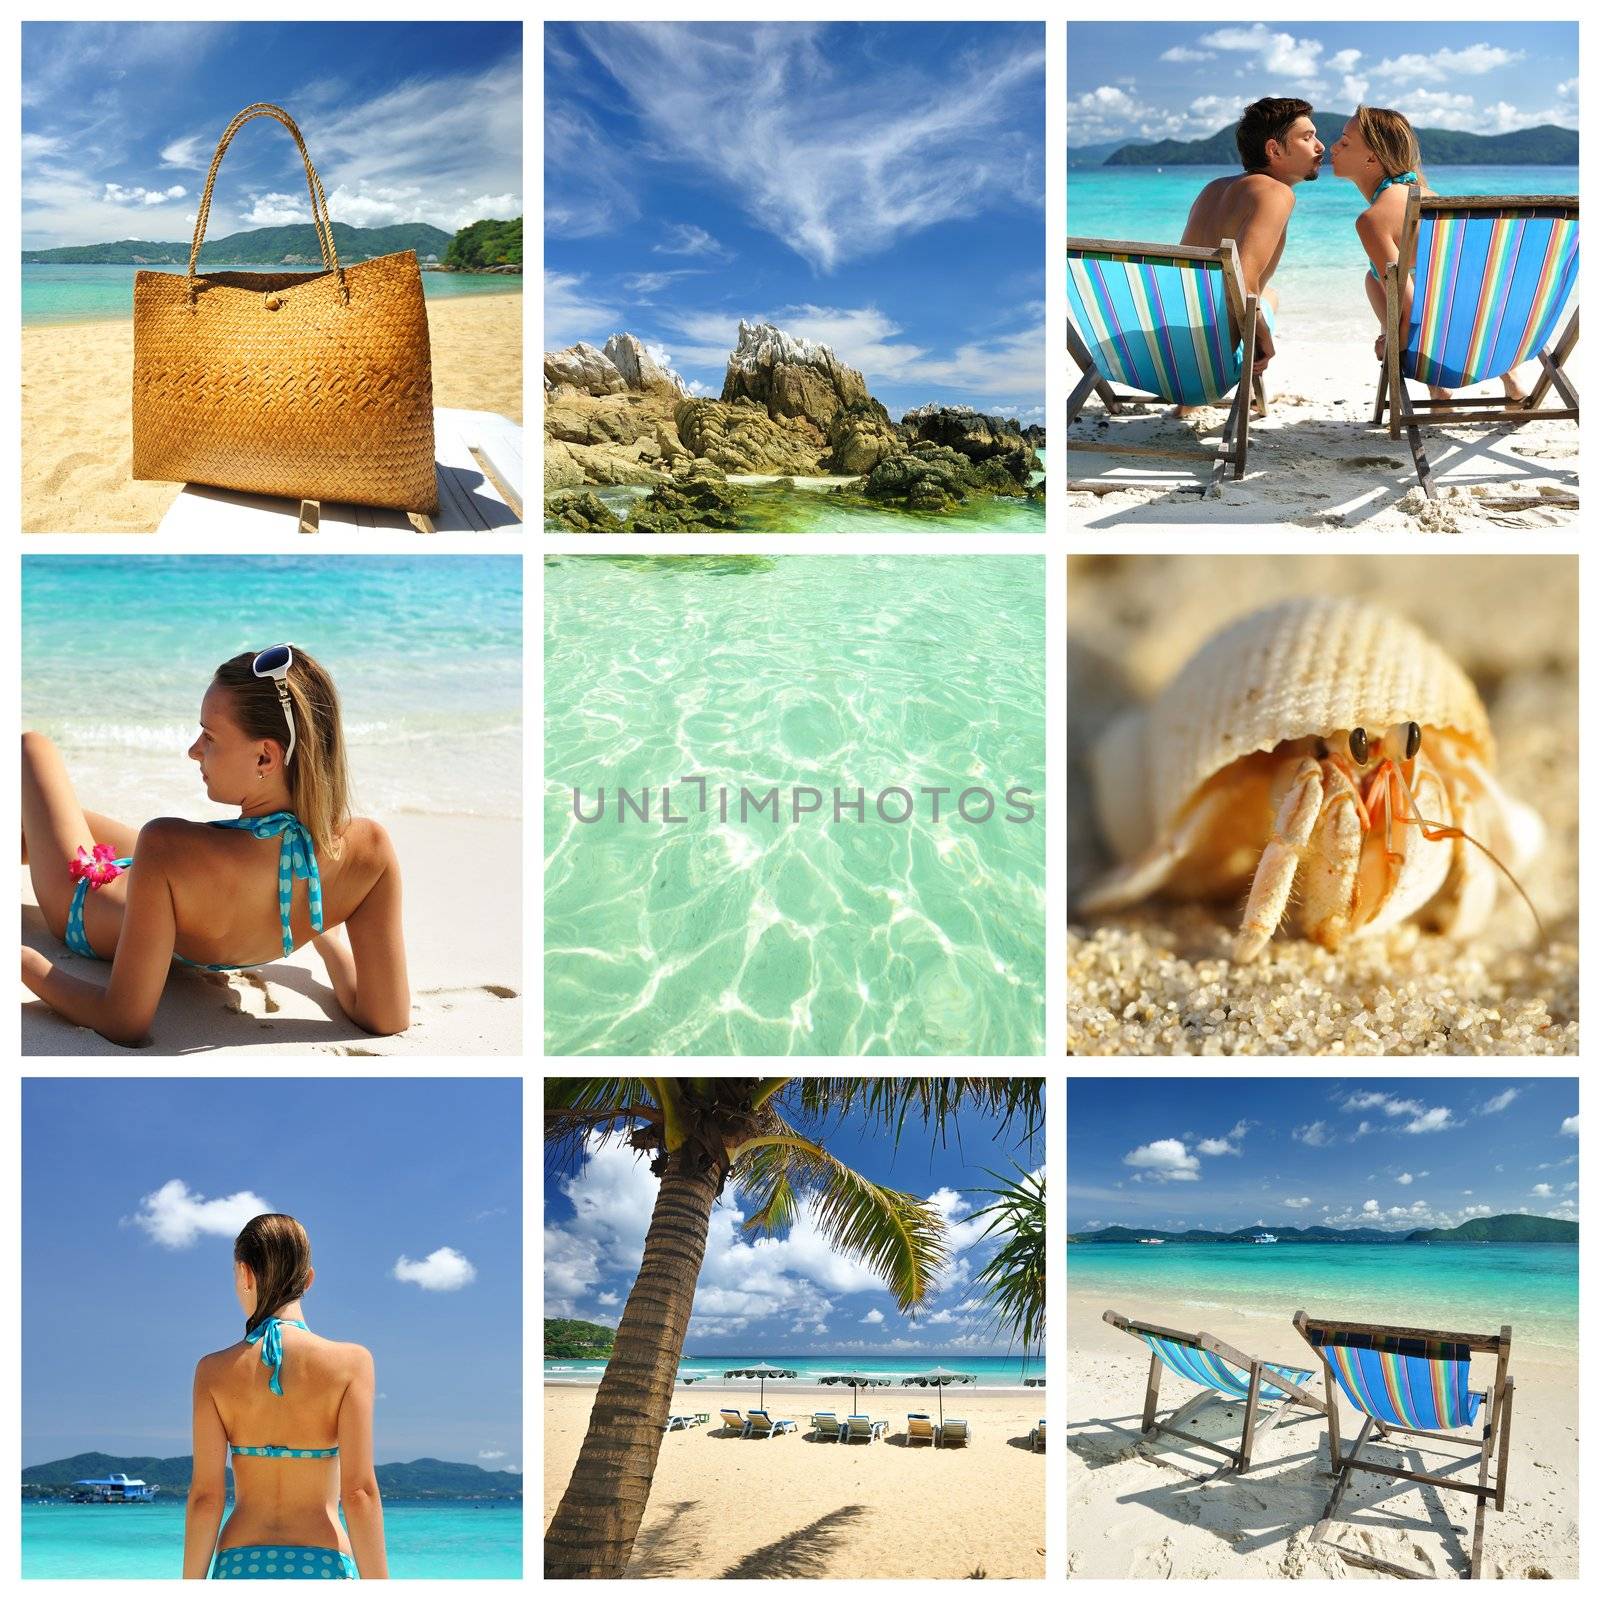 Collage made with beautiful tropical resort shots